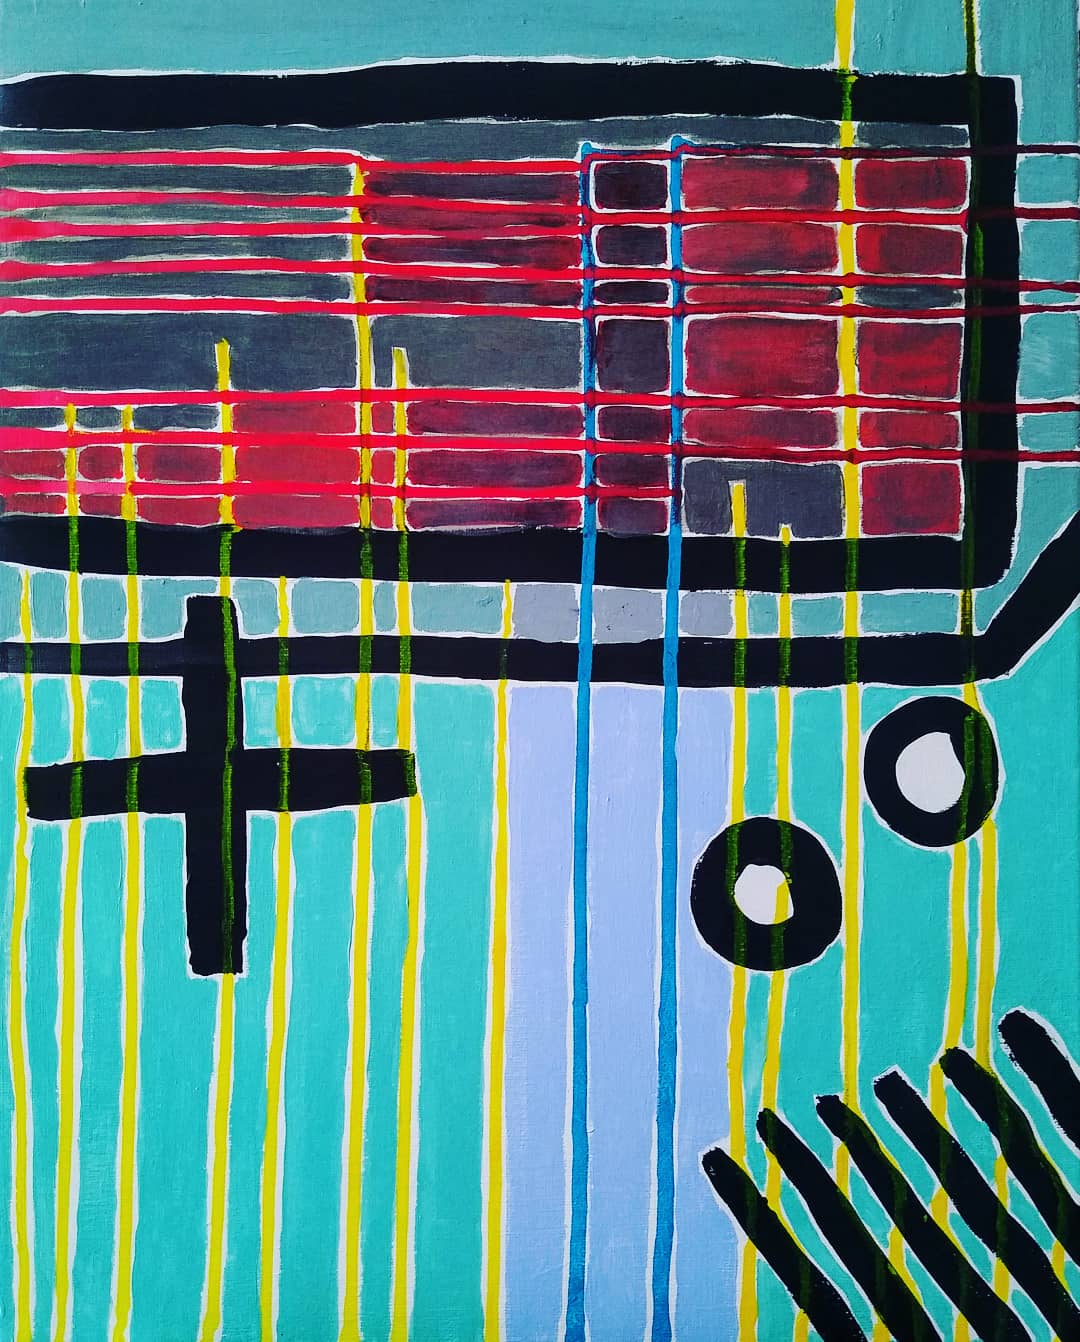 "abstract boy" acrylic painting by Oscar Will of a green striped game playing machine